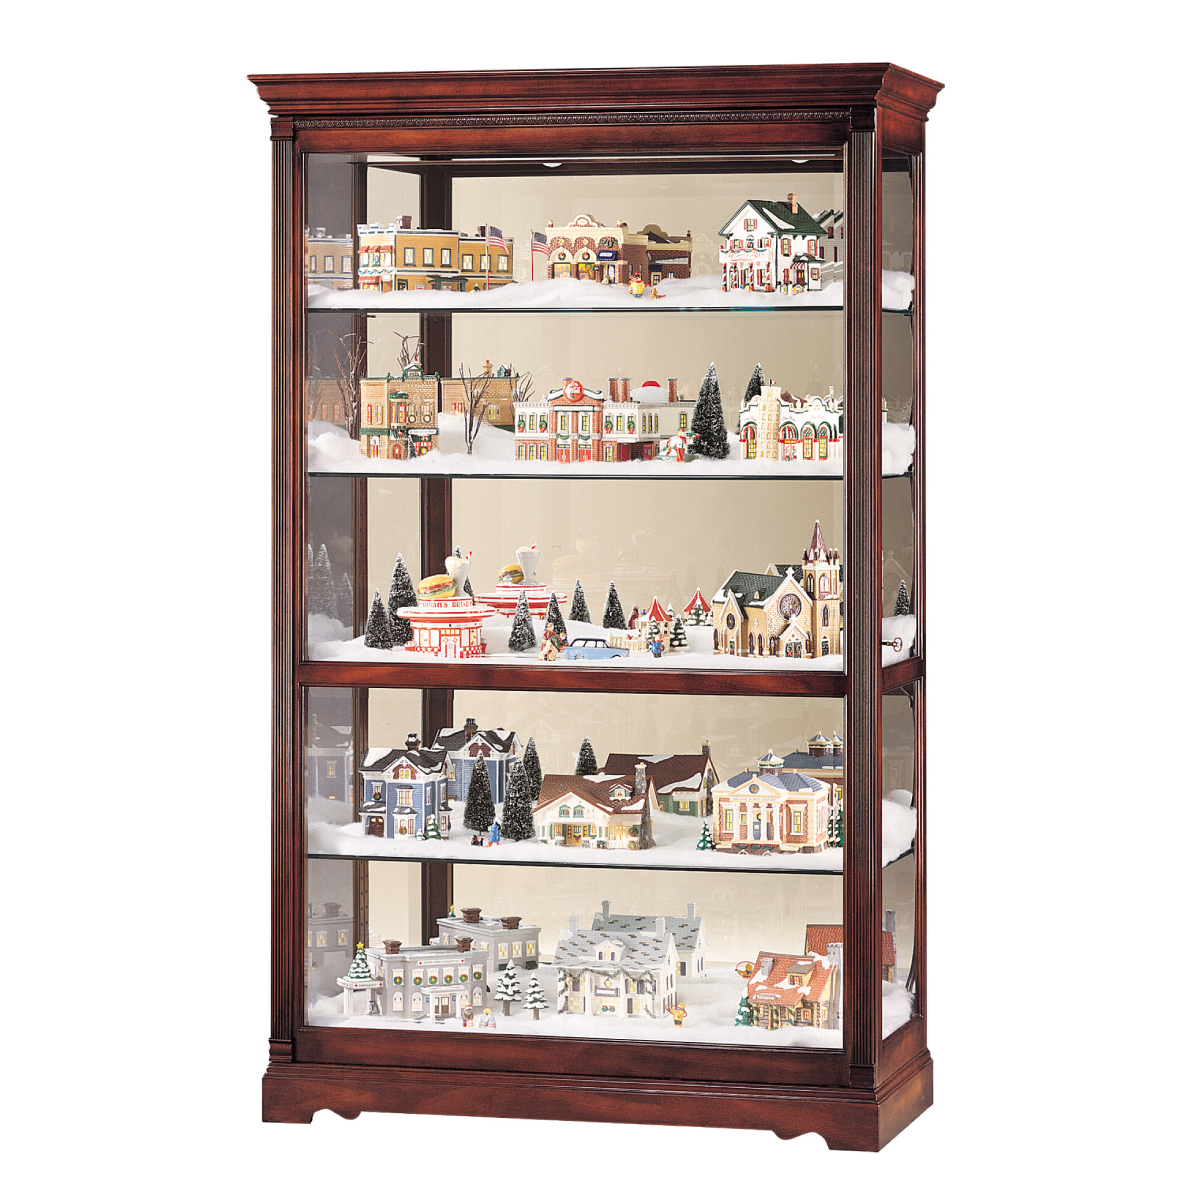 Howard Miller Townsend Curio Cabinet 680235 - Home Bars USA